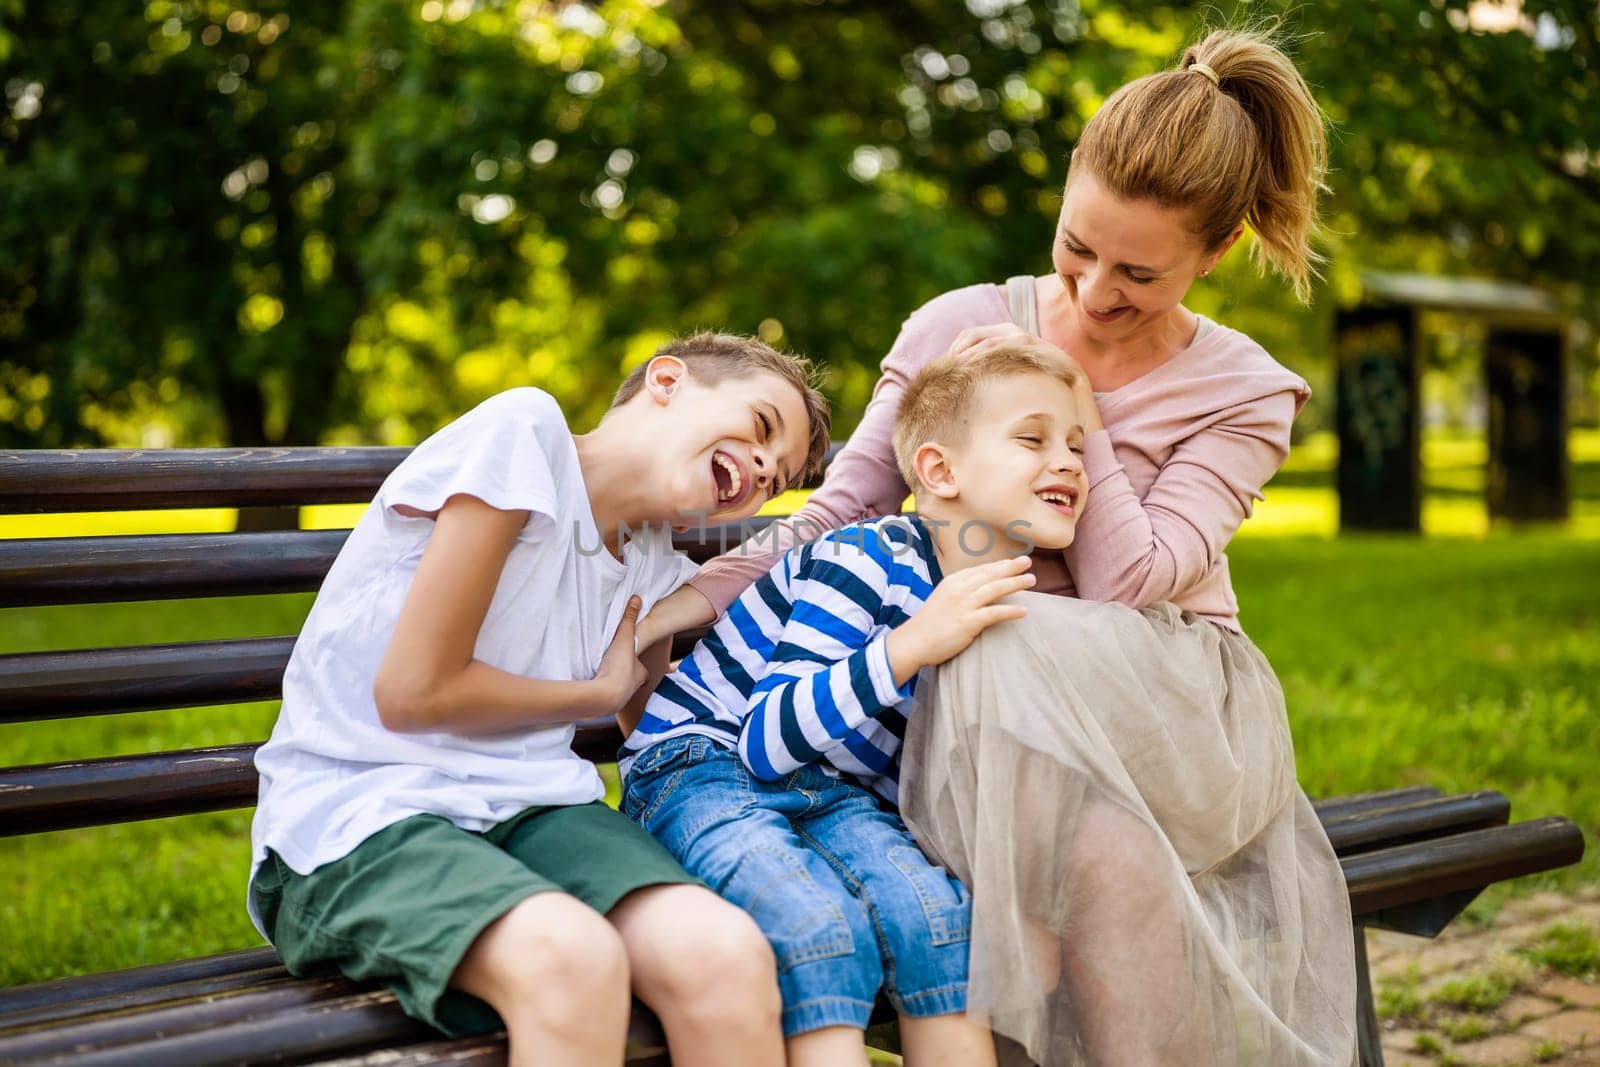 Happy mother is sitting with her sons on bench in park. They are talking and enjoying their time together.